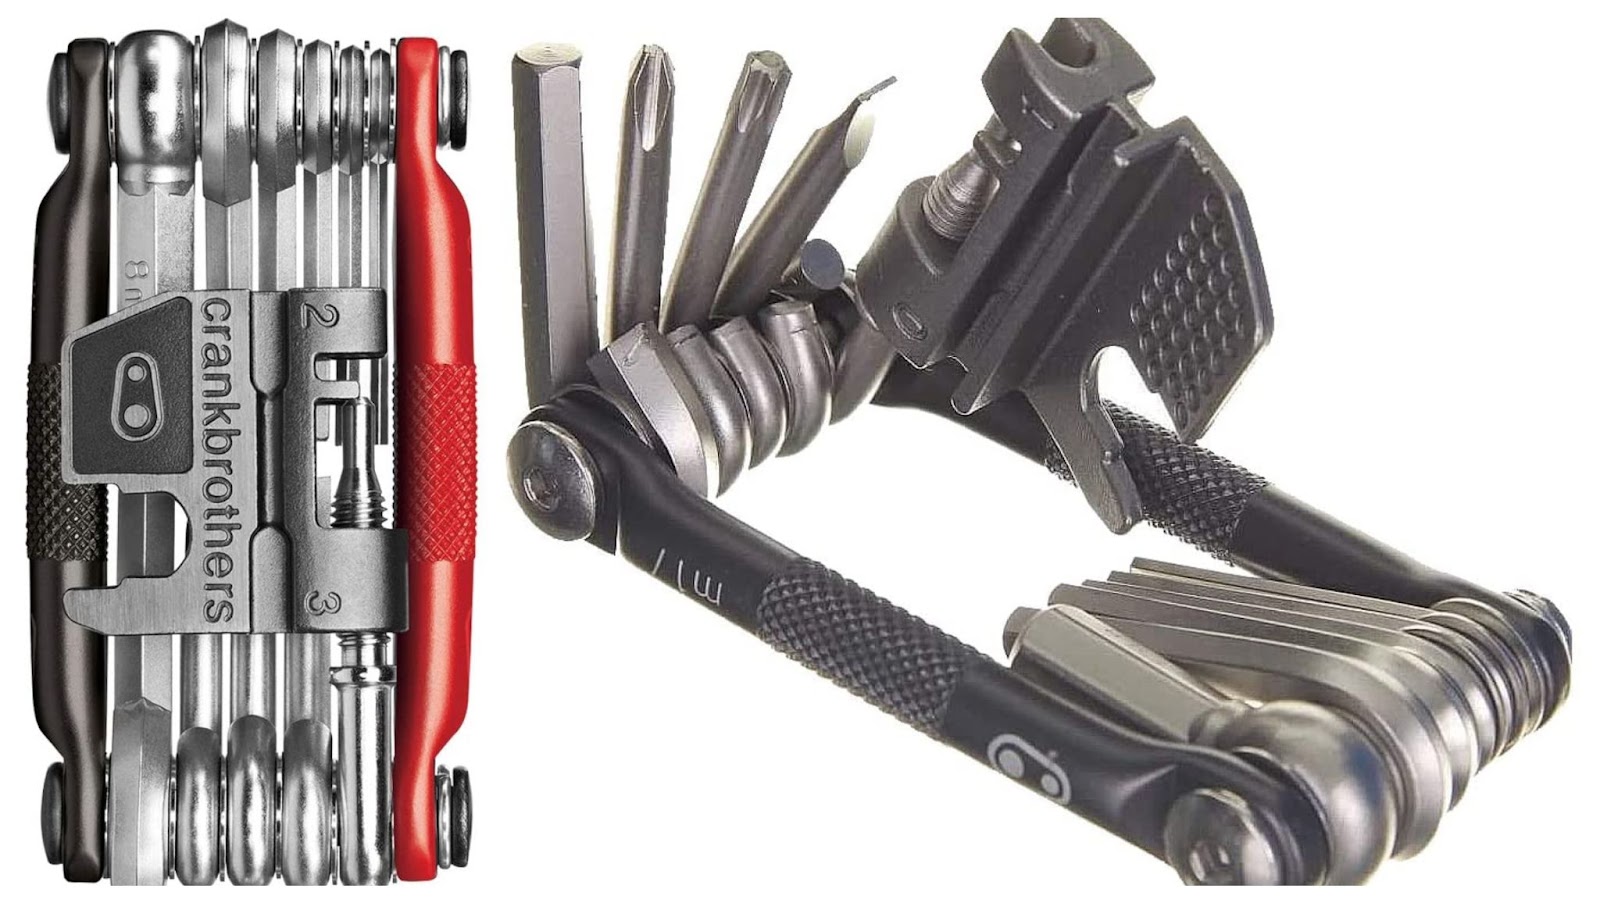 A mountain bike multi-tool kit includes most of the essential tools that you will need to do repairs while you are out riding.